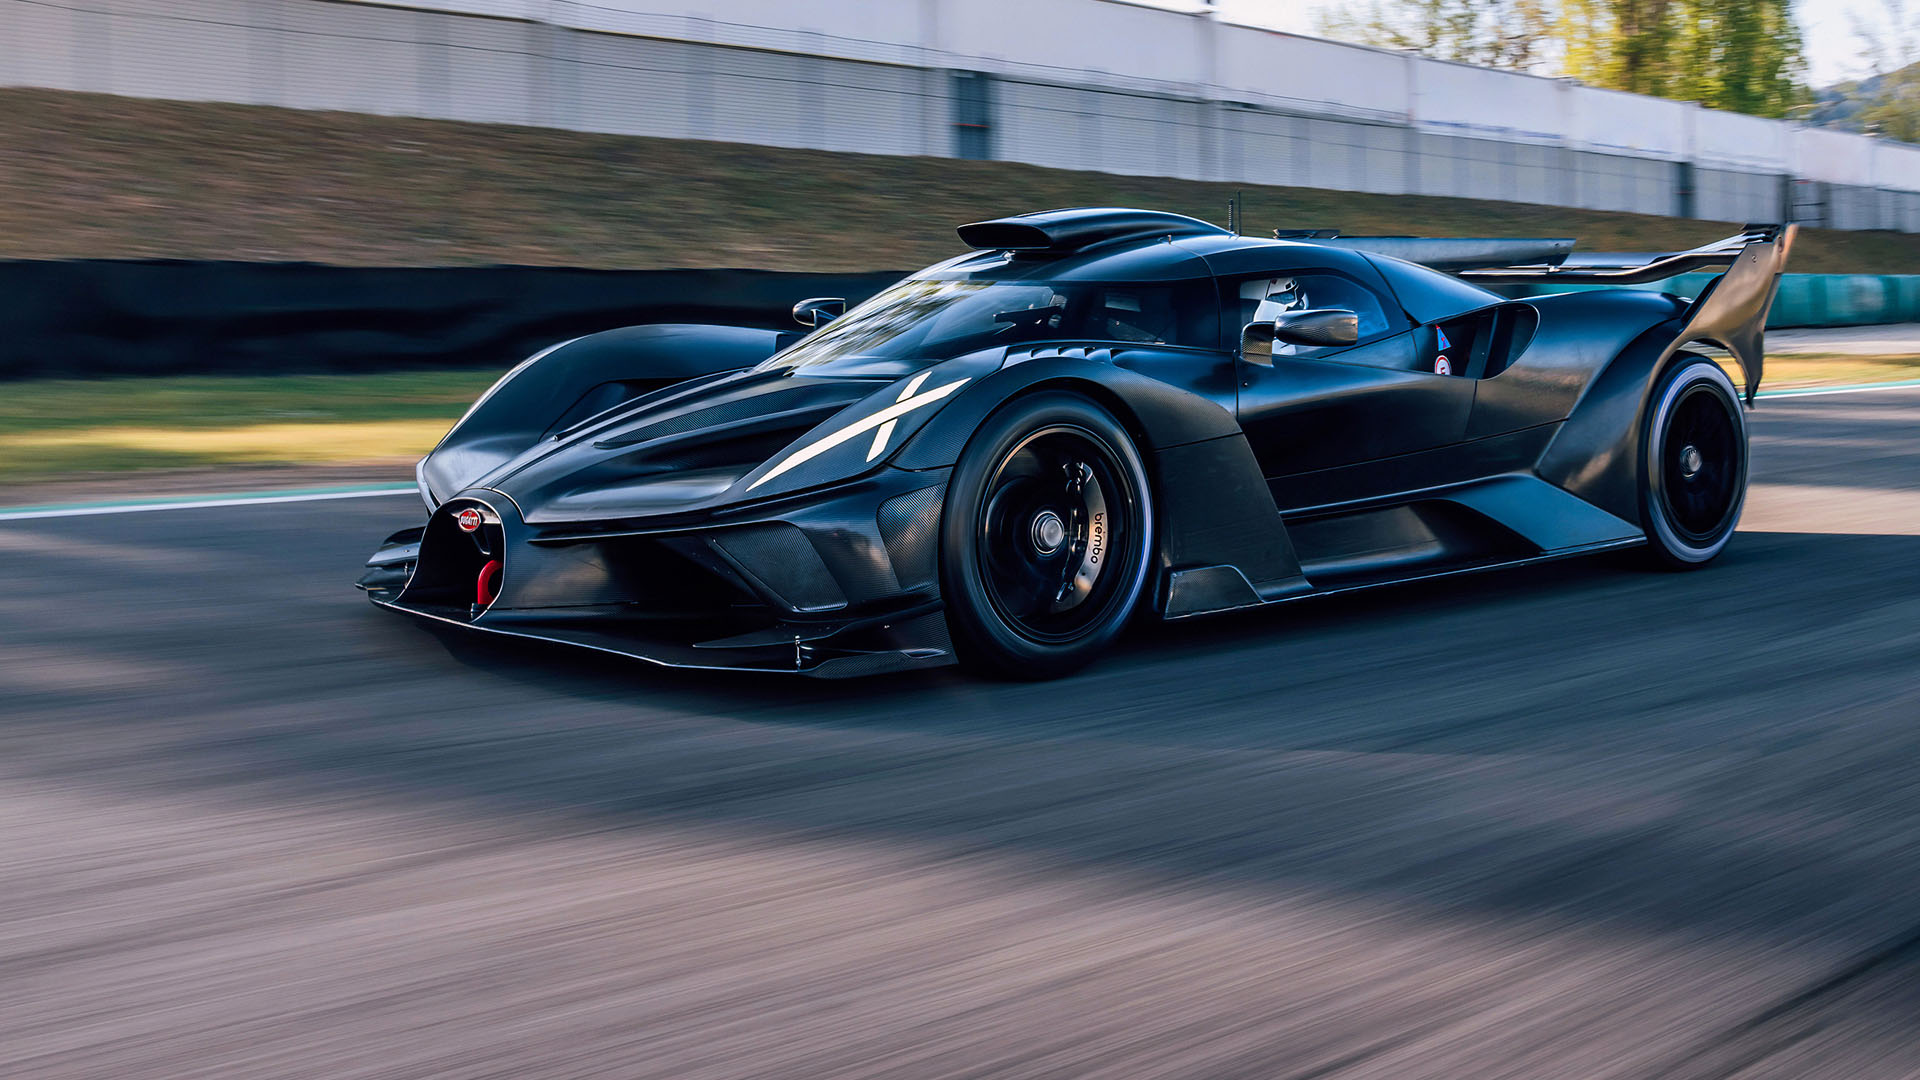 Bugatti is making Bolide hypercar concept a reality